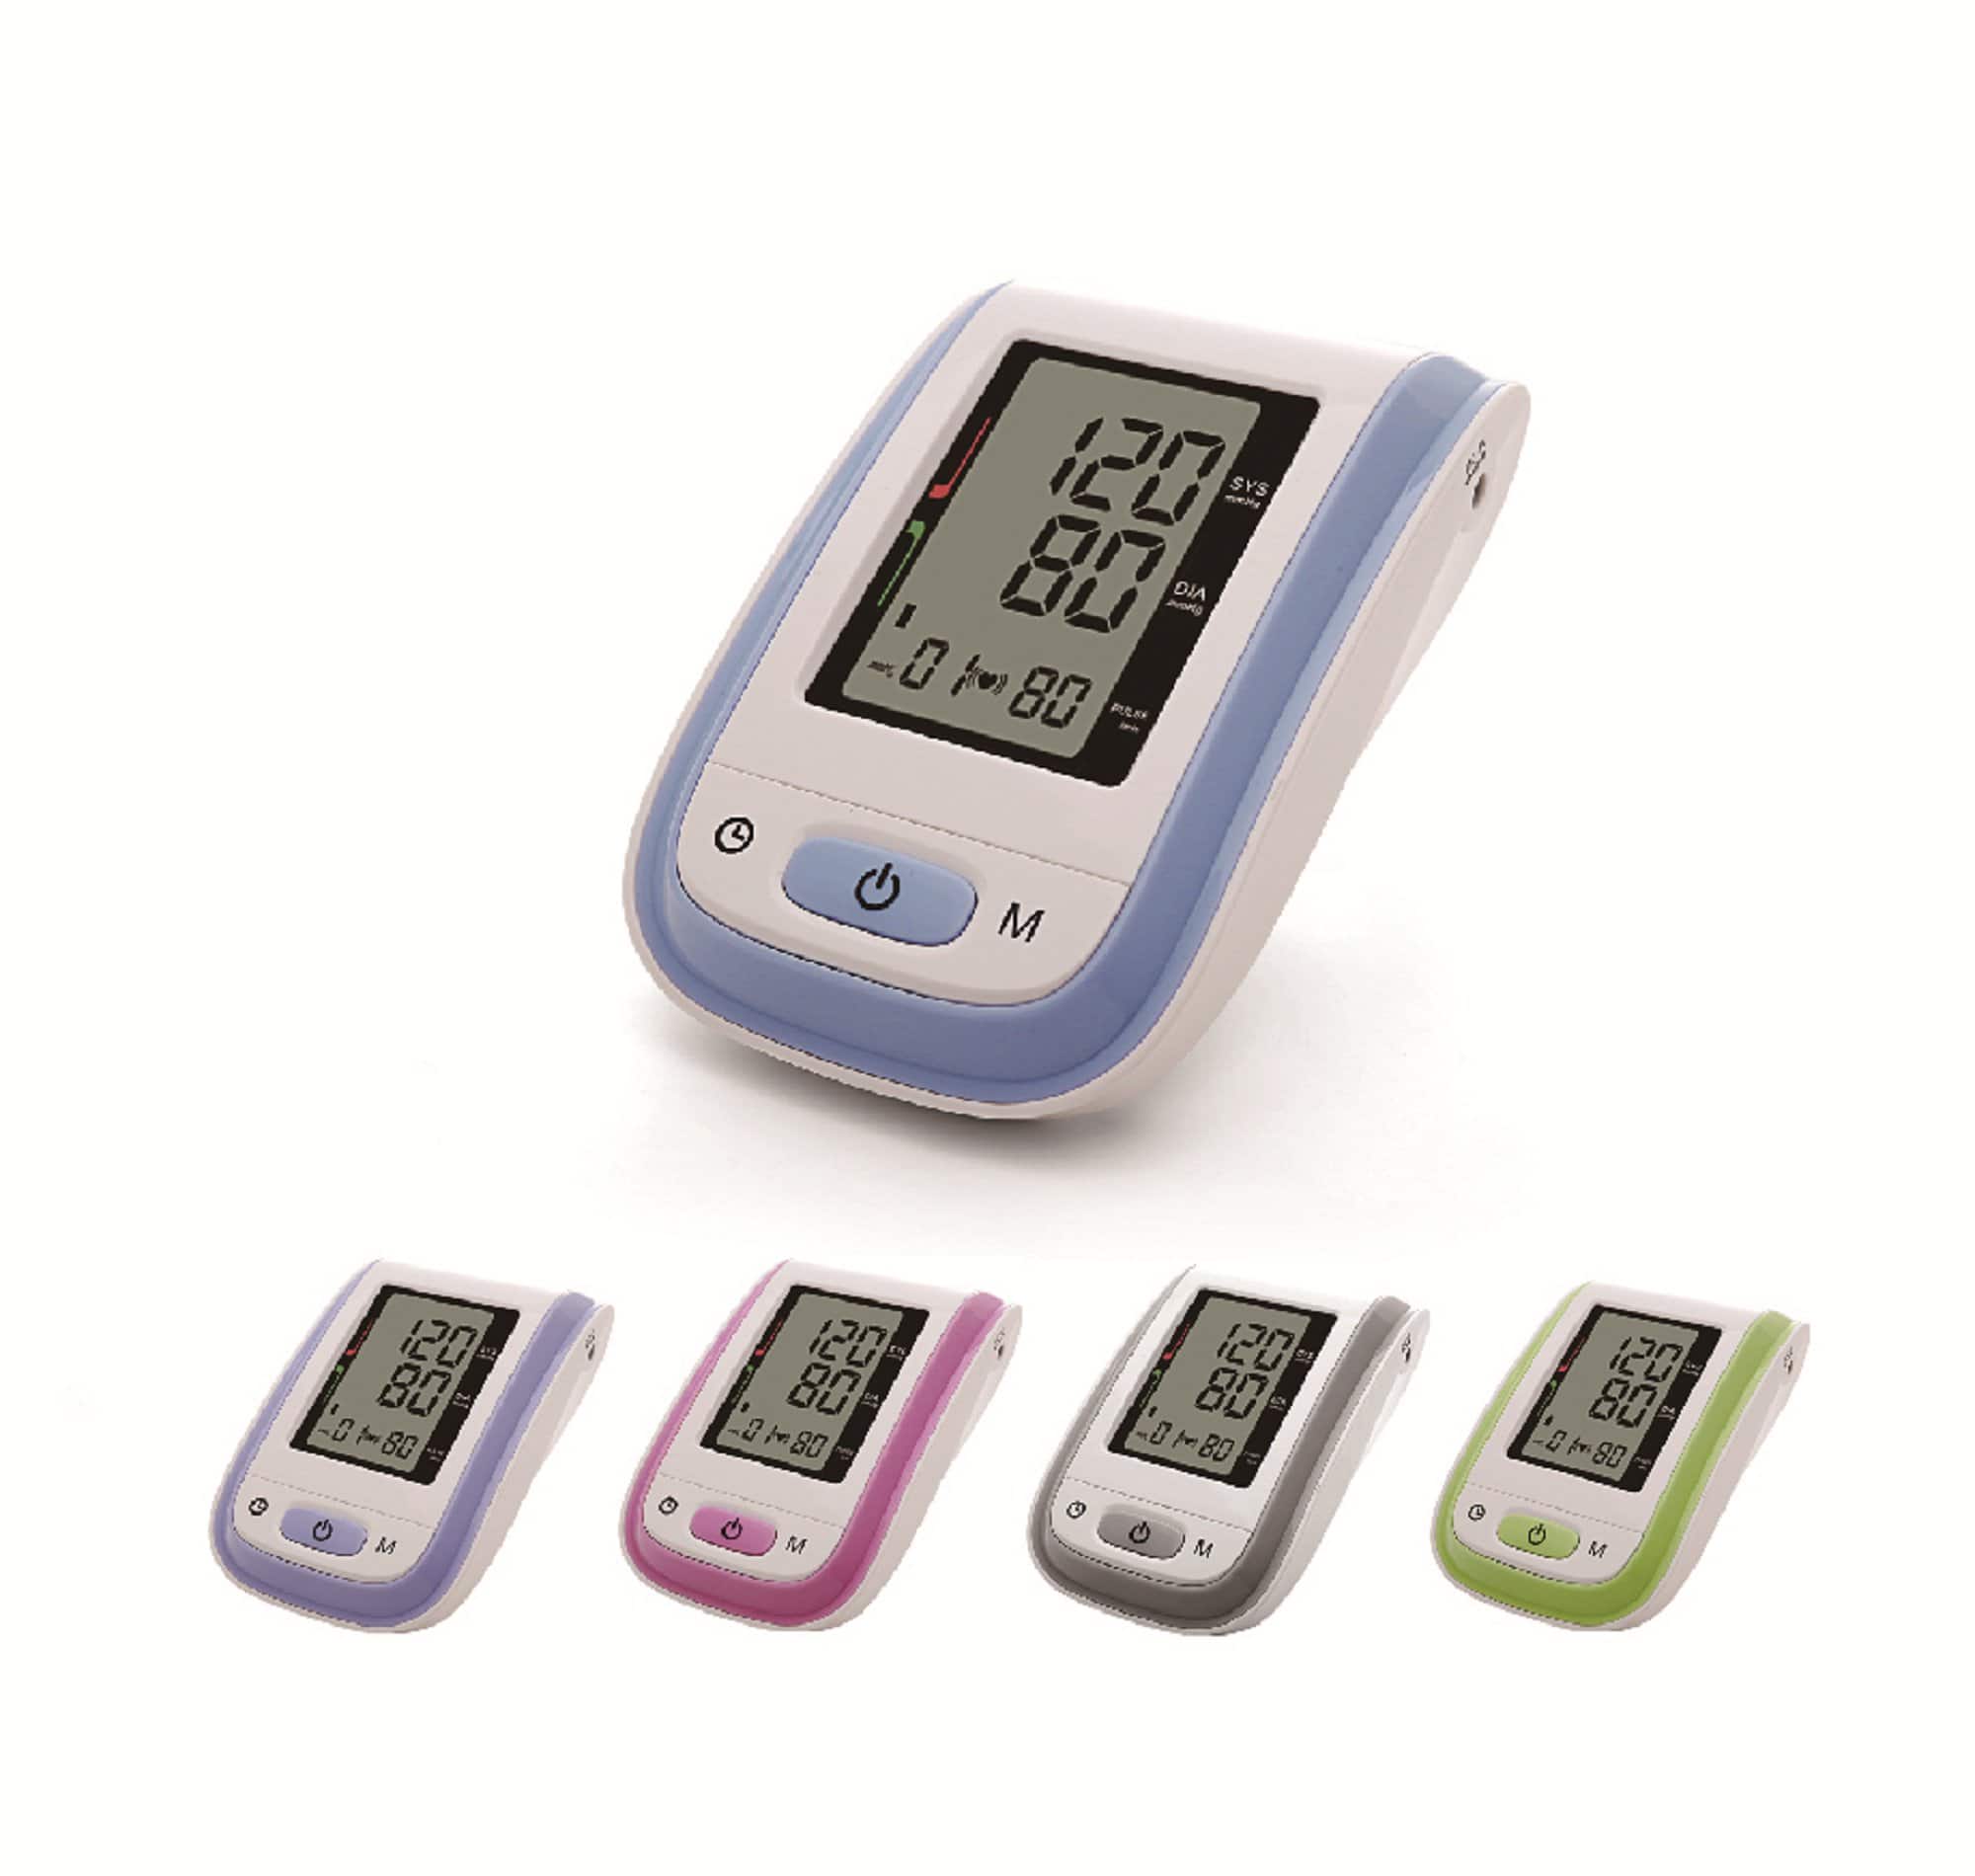 Yonker Arm blood pressure monitor for sale